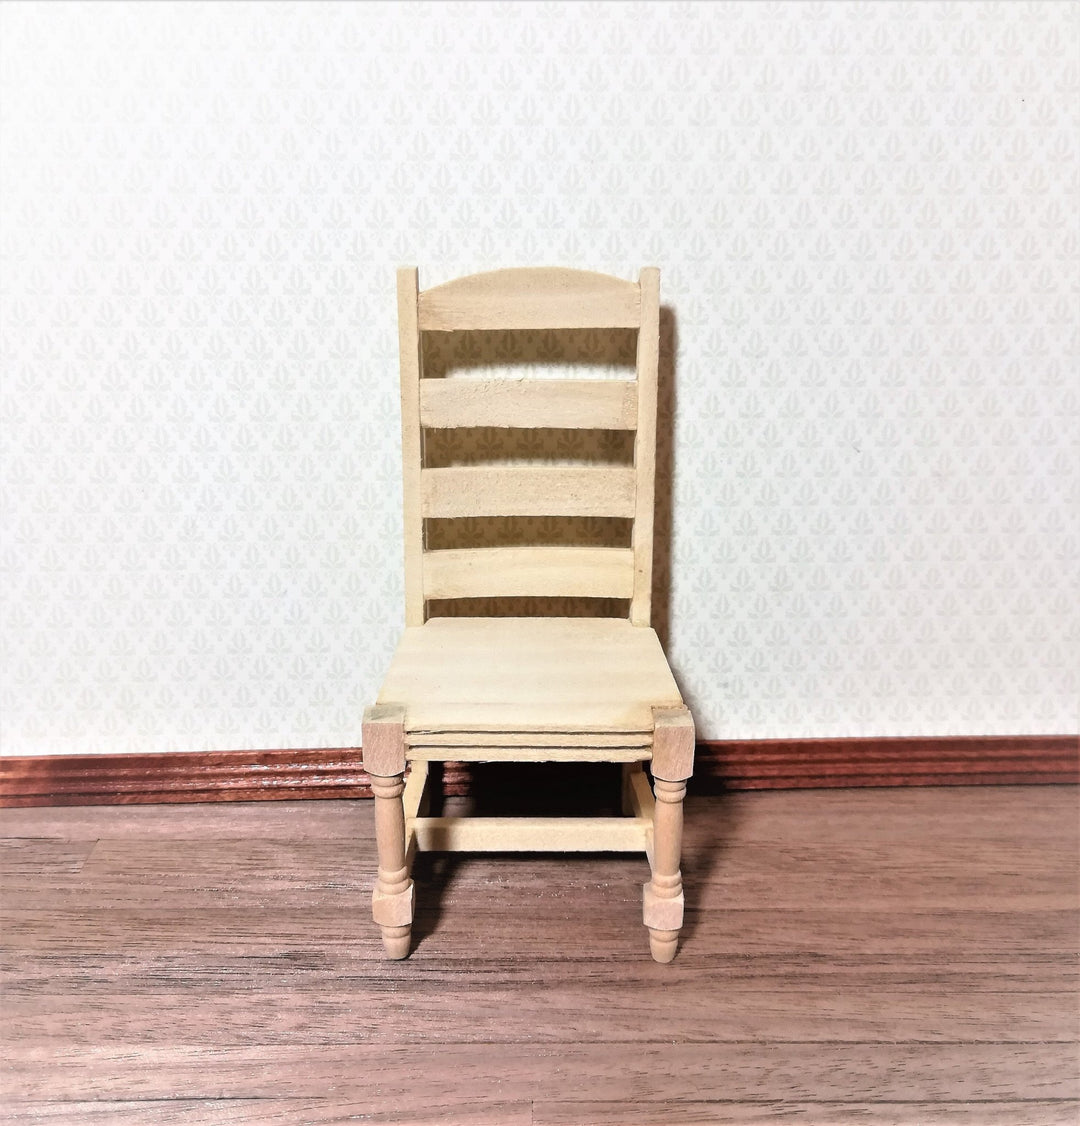 Dollhouse Miniature Chair Unfinished Ladderback for Kitchen or Dining Room 1:12 - Miniature Crush